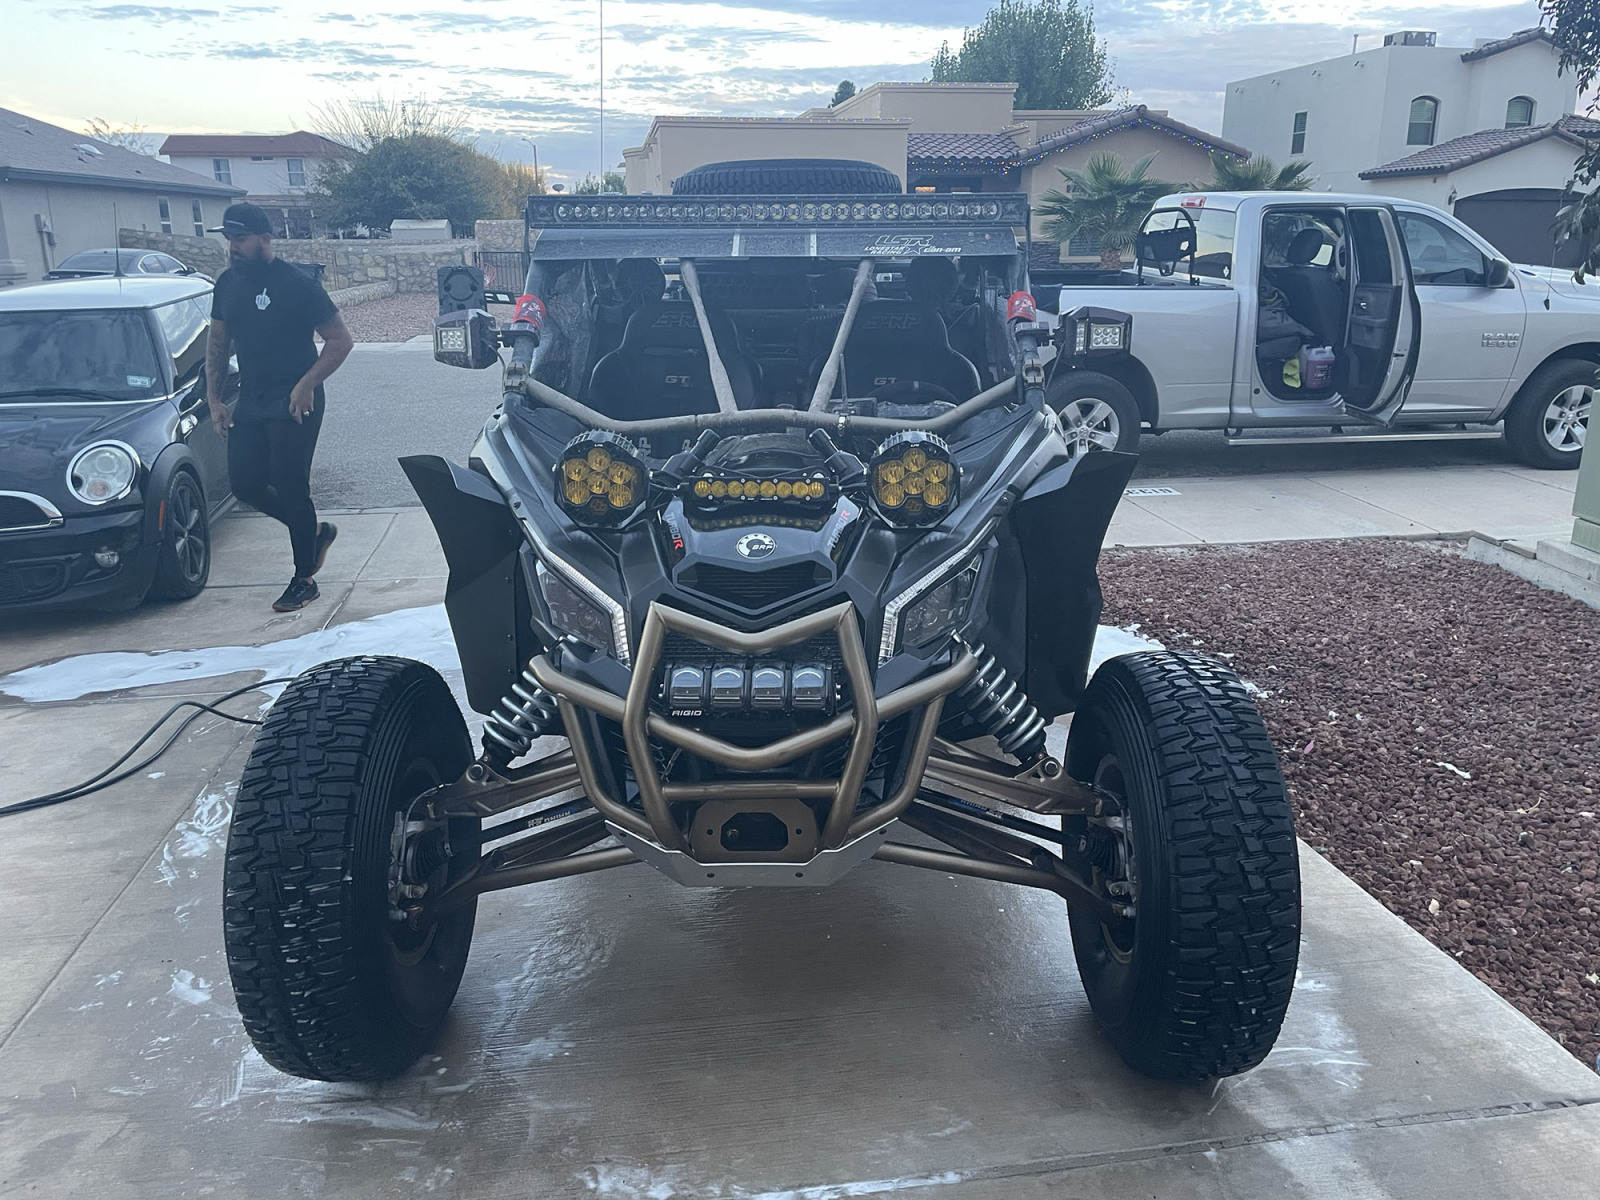 For Sale: 2019 can am maverick x3 turbo R with over 40k in upgrades - photo1